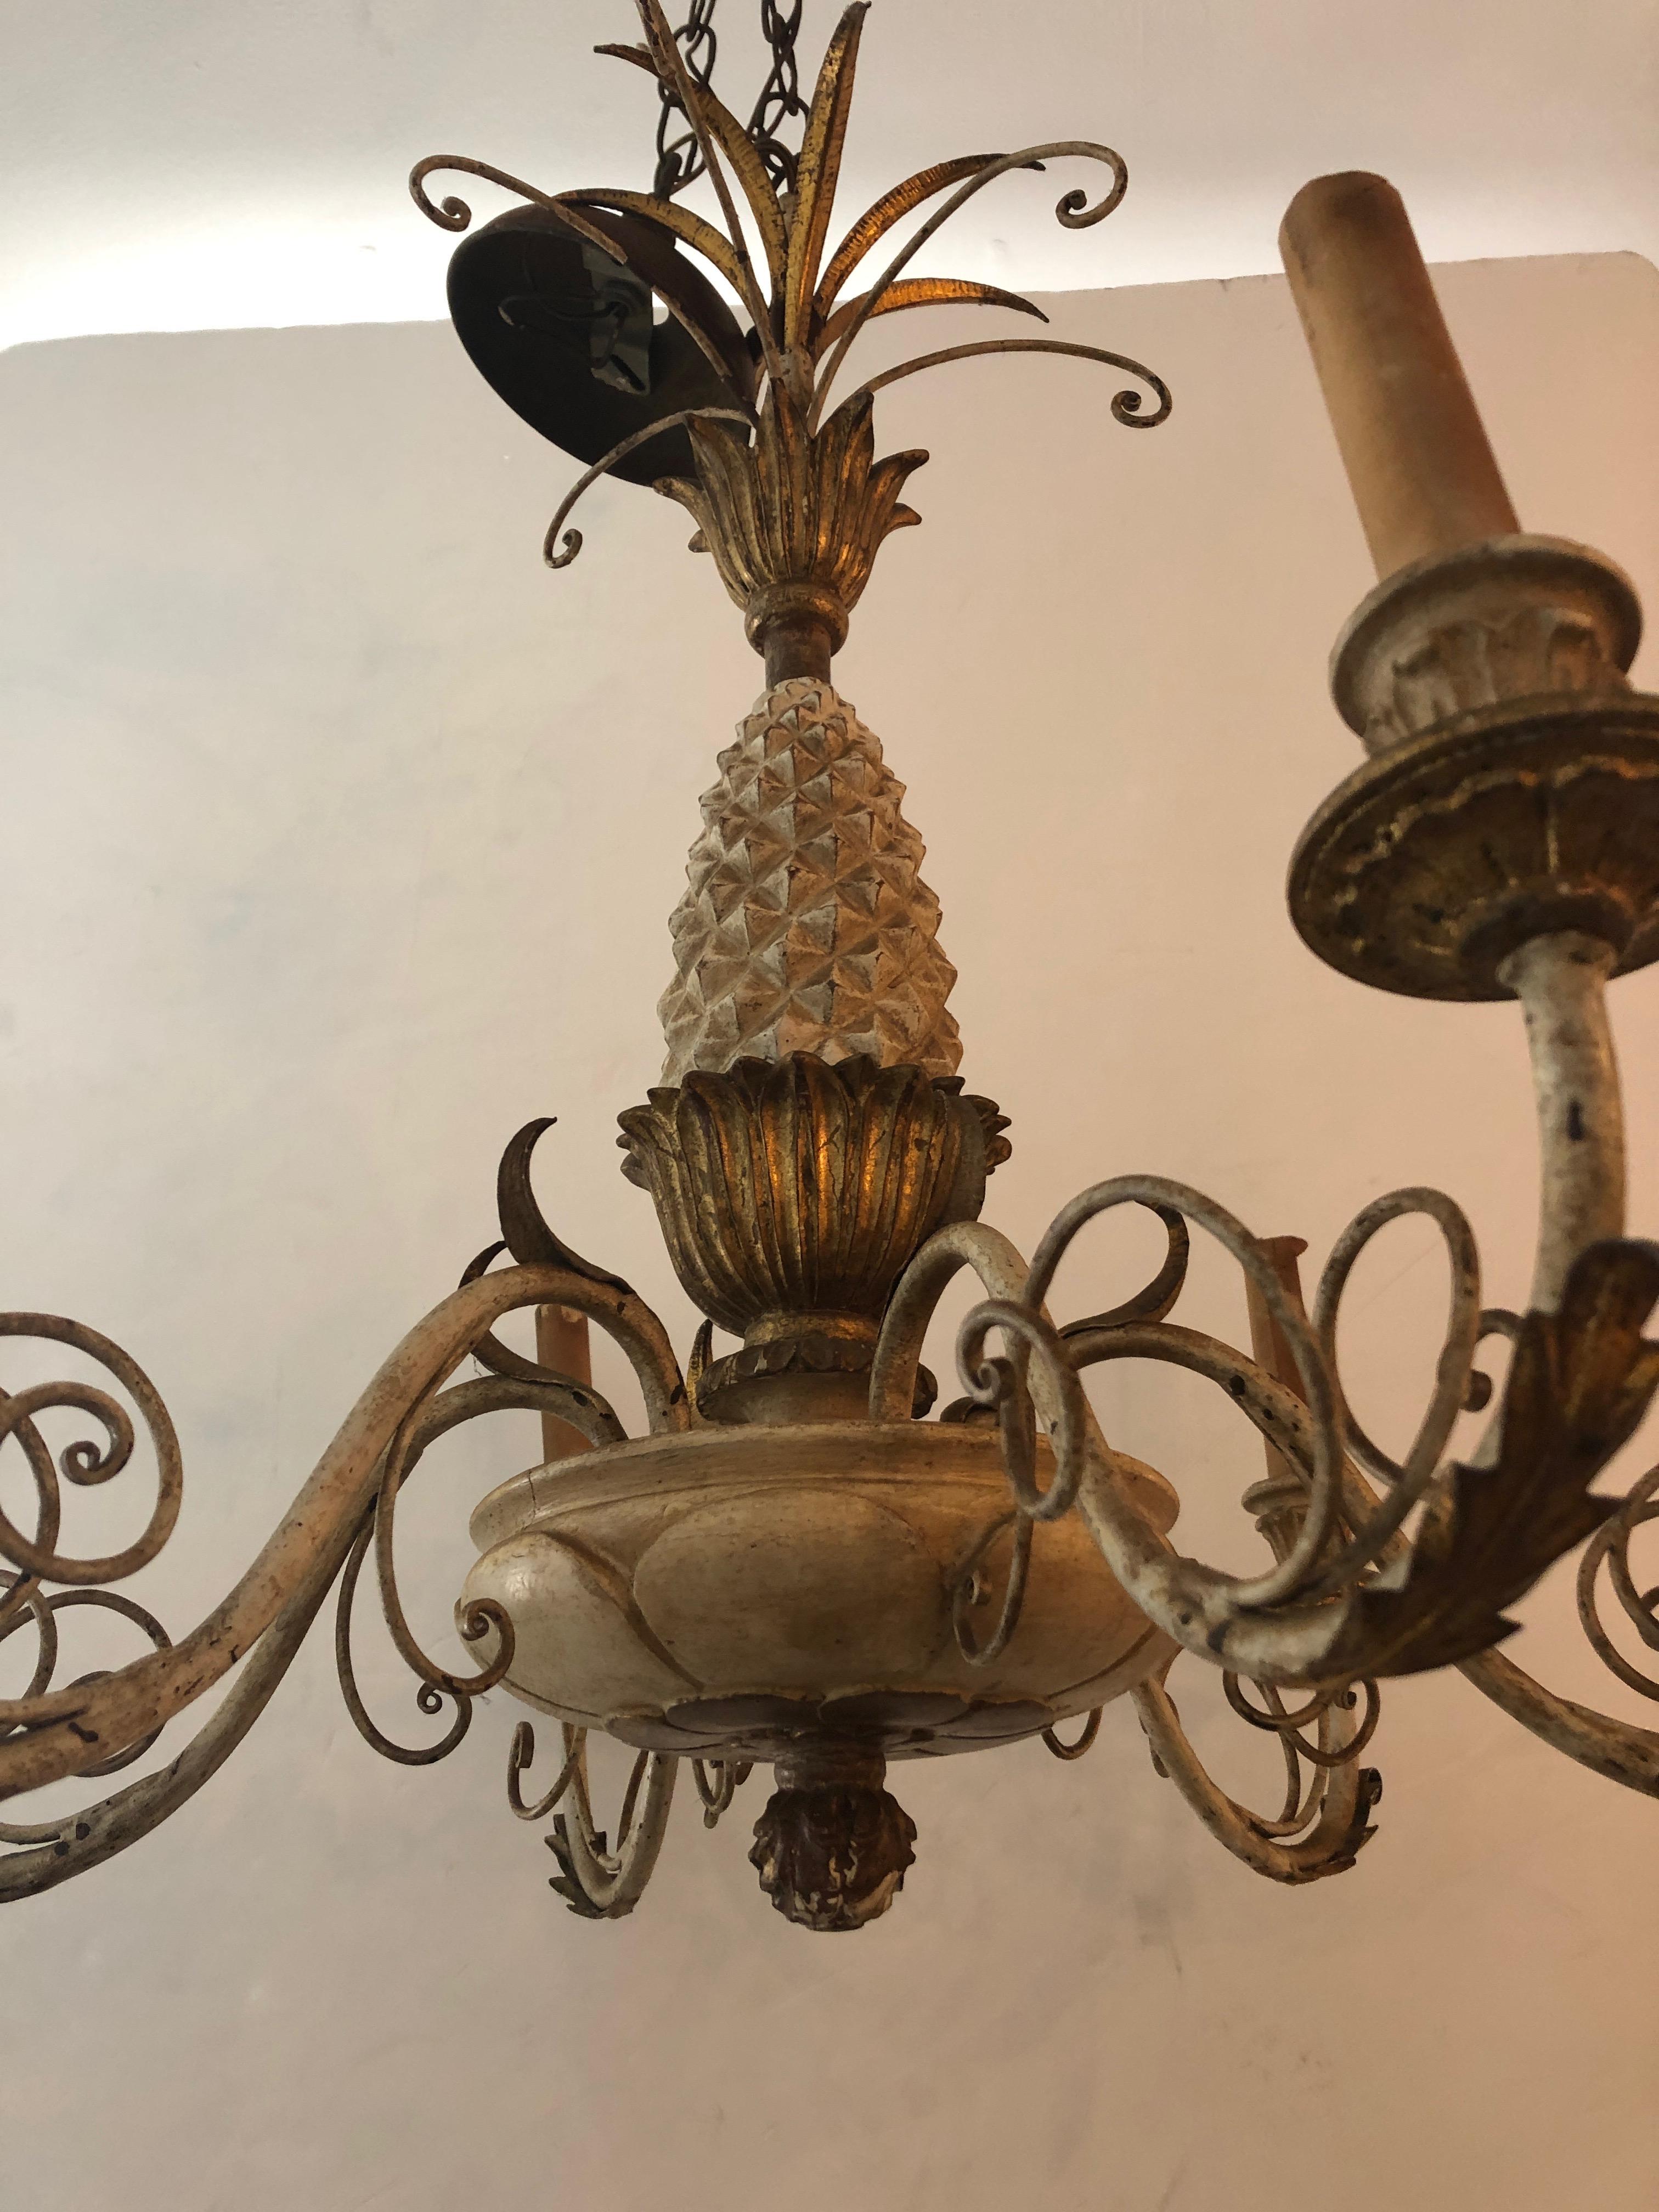 A classically elegant off-white and gold pineapple motif Italian chandelier of carved wood, iron and tole having 6 arms and wonderful details from top to bottom. Comes with ceiling CAP.